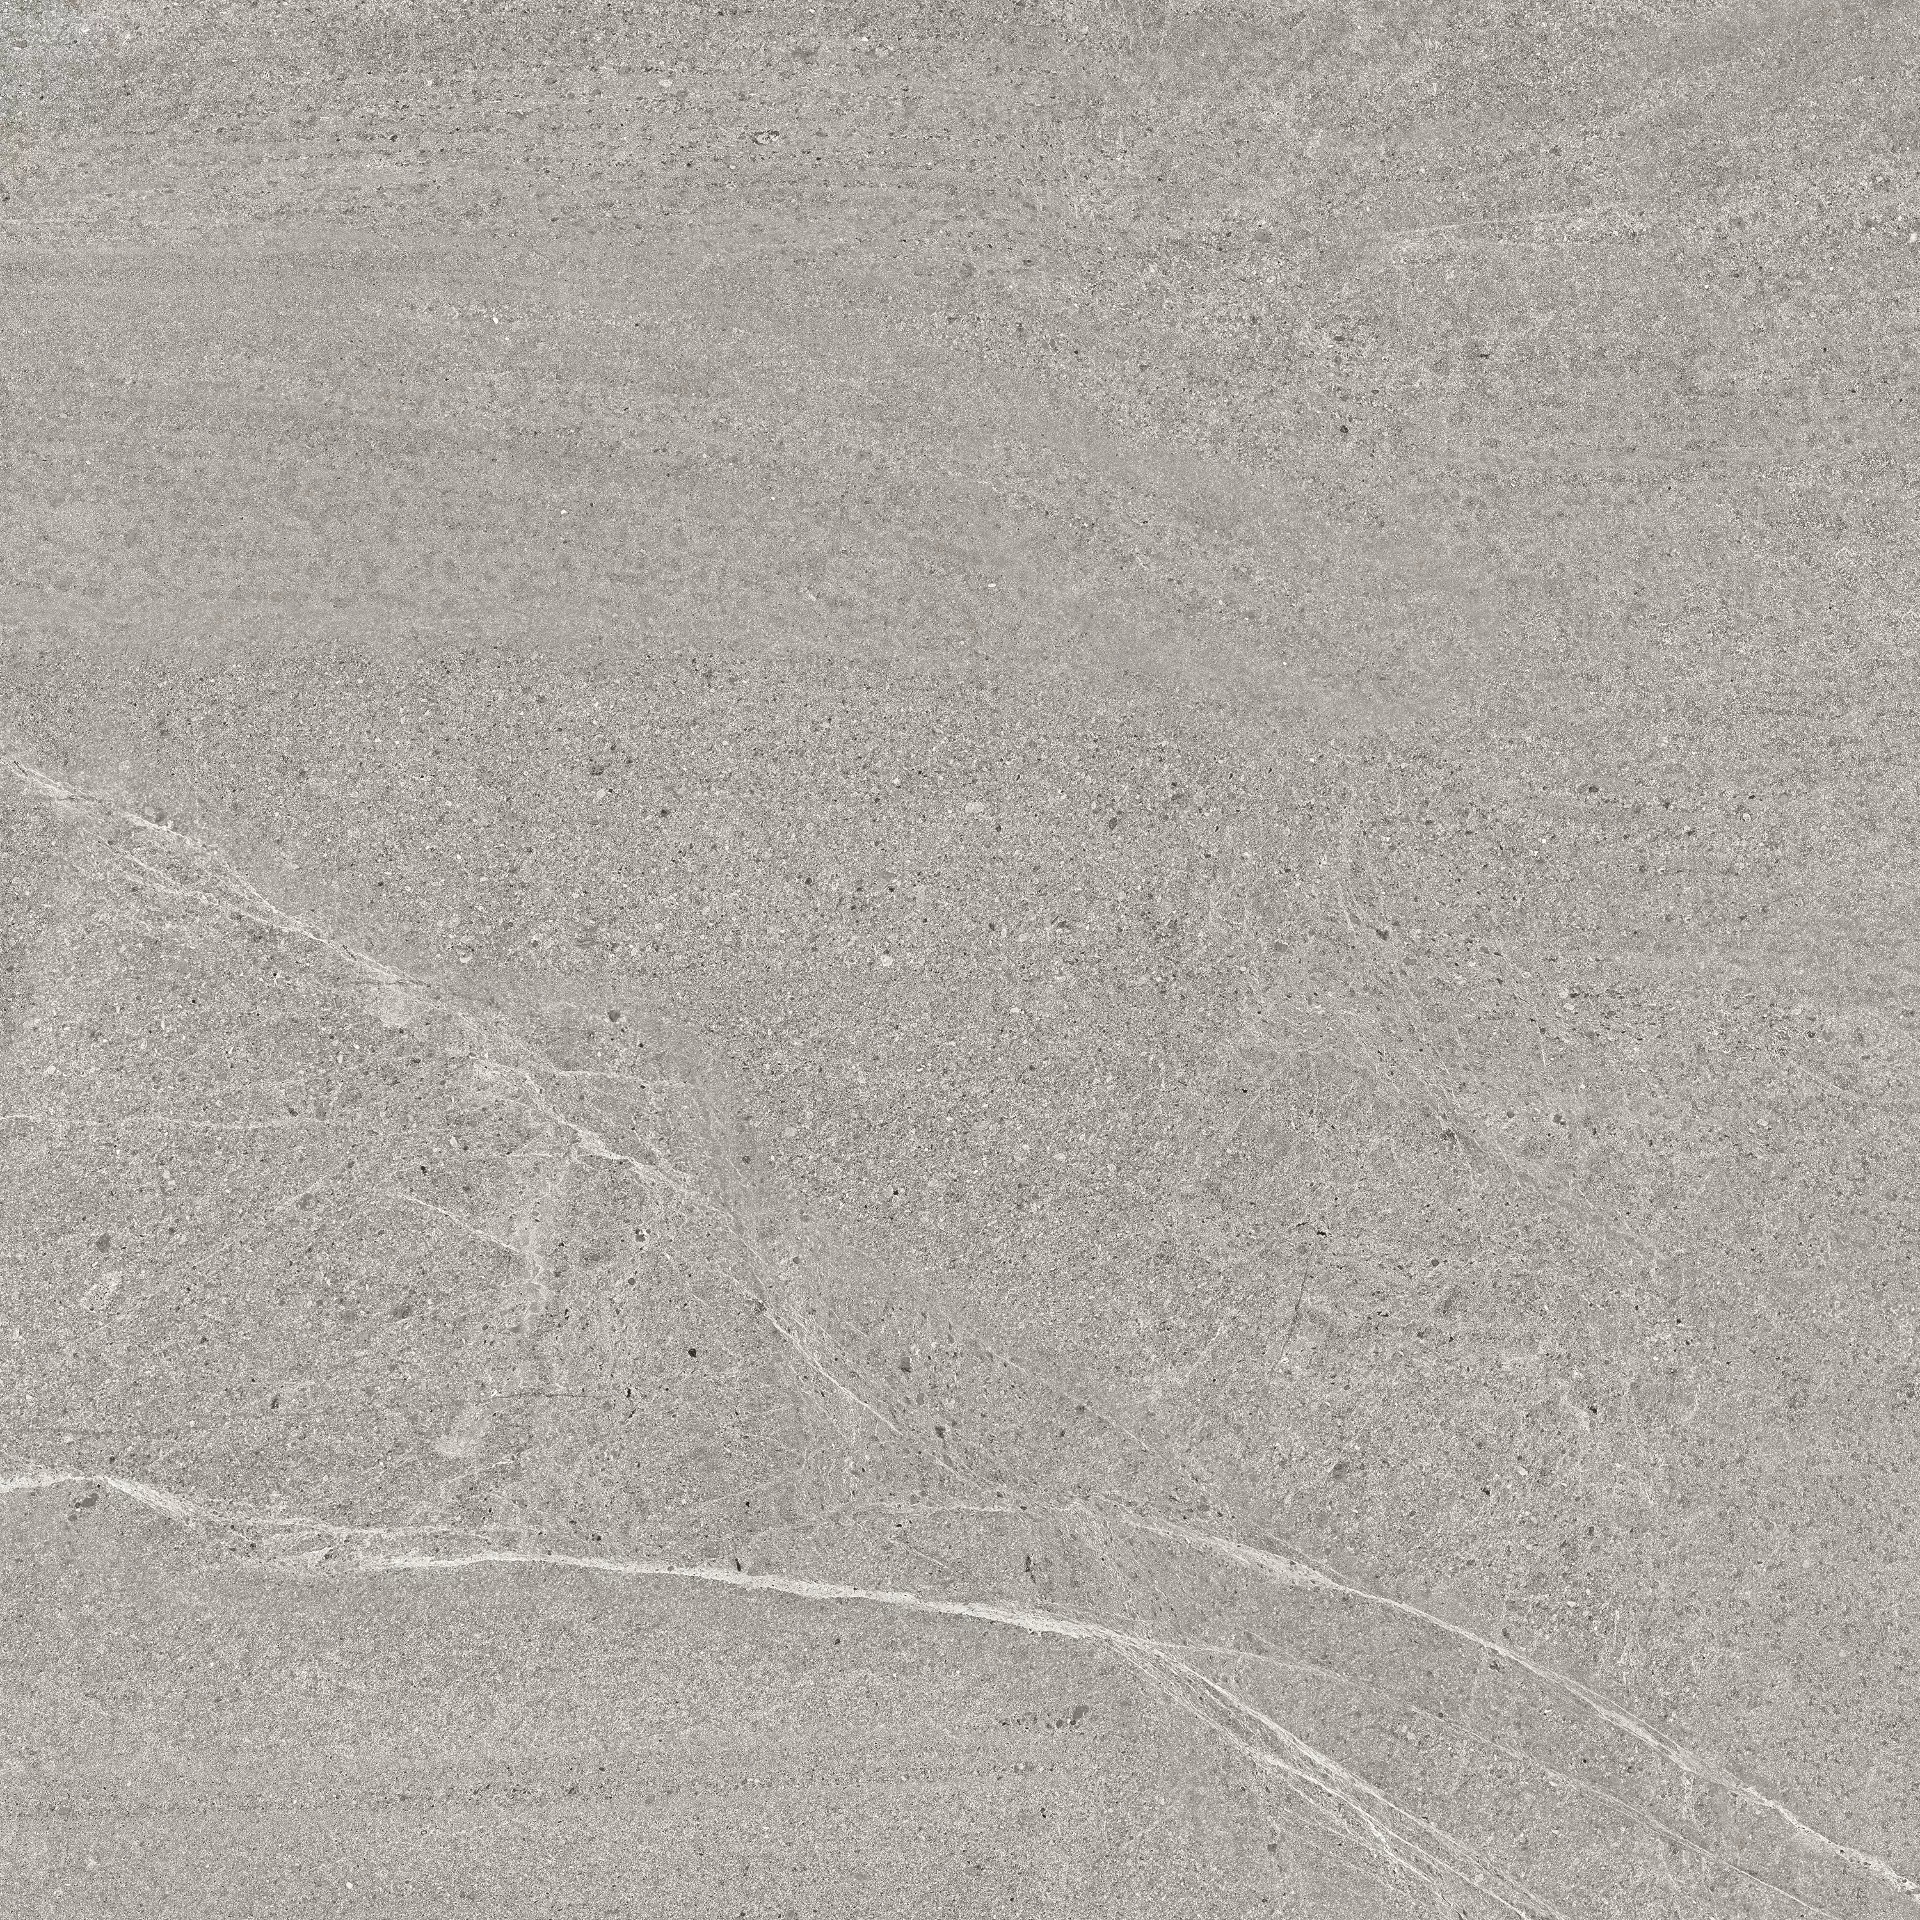 Cottodeste Limestone Oyster Naturale Protect EGWLS21 60x60cm rectified 14mm